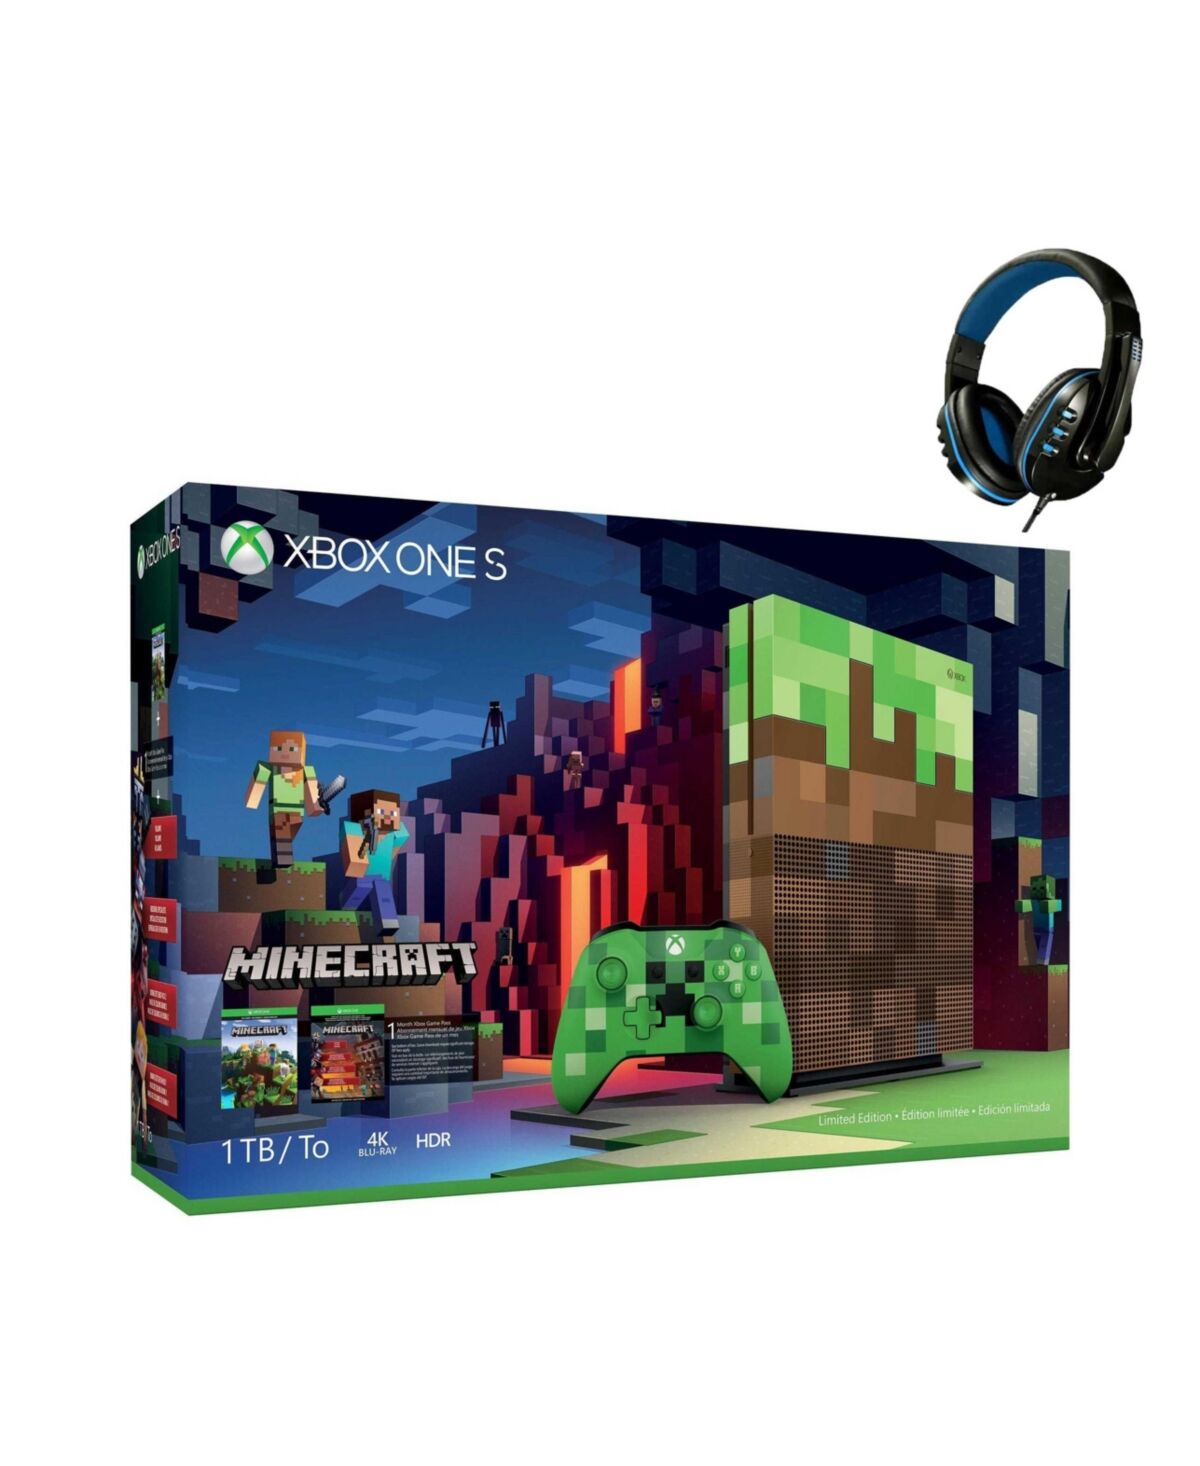 Bolt Axtion 23C-00001 Xbox One S Minecraft Limited Edition 1TB Gaming Console with Bolt Axtion Bundle Like New - Green